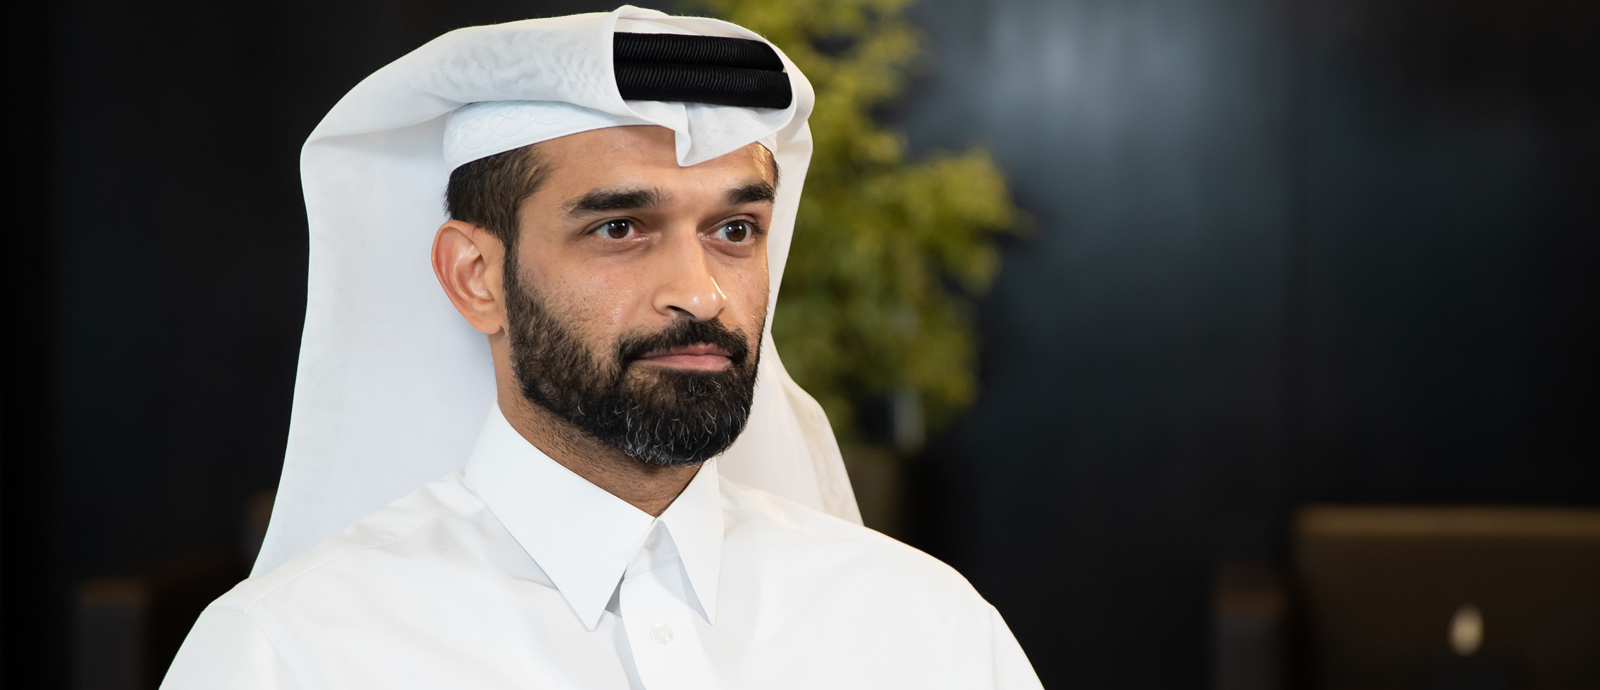 H.E. Hassan Al Thawadi, Secretary General of the Supreme Committee for Delivery & Legacy